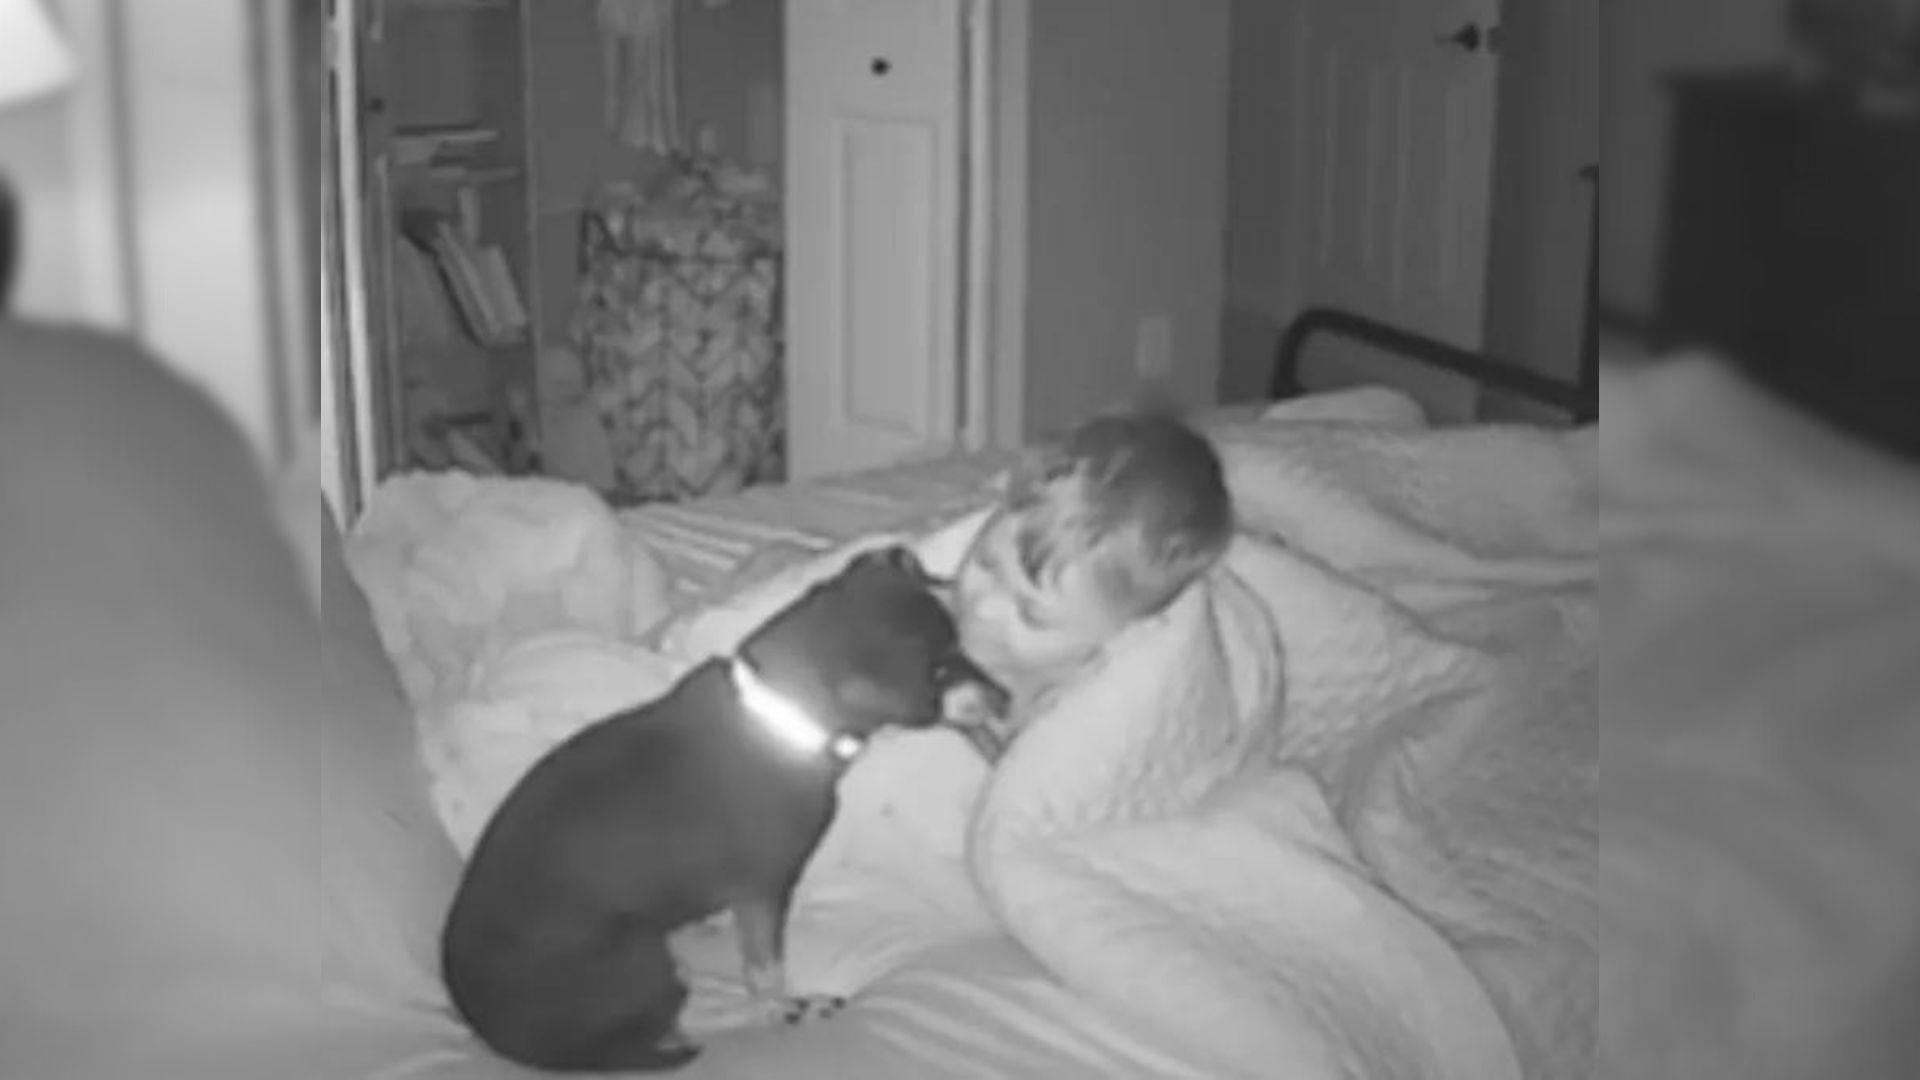 The Video Of This Dog Going Into A Toddler’s Bed For A Snuggle Is Really Heartwarming